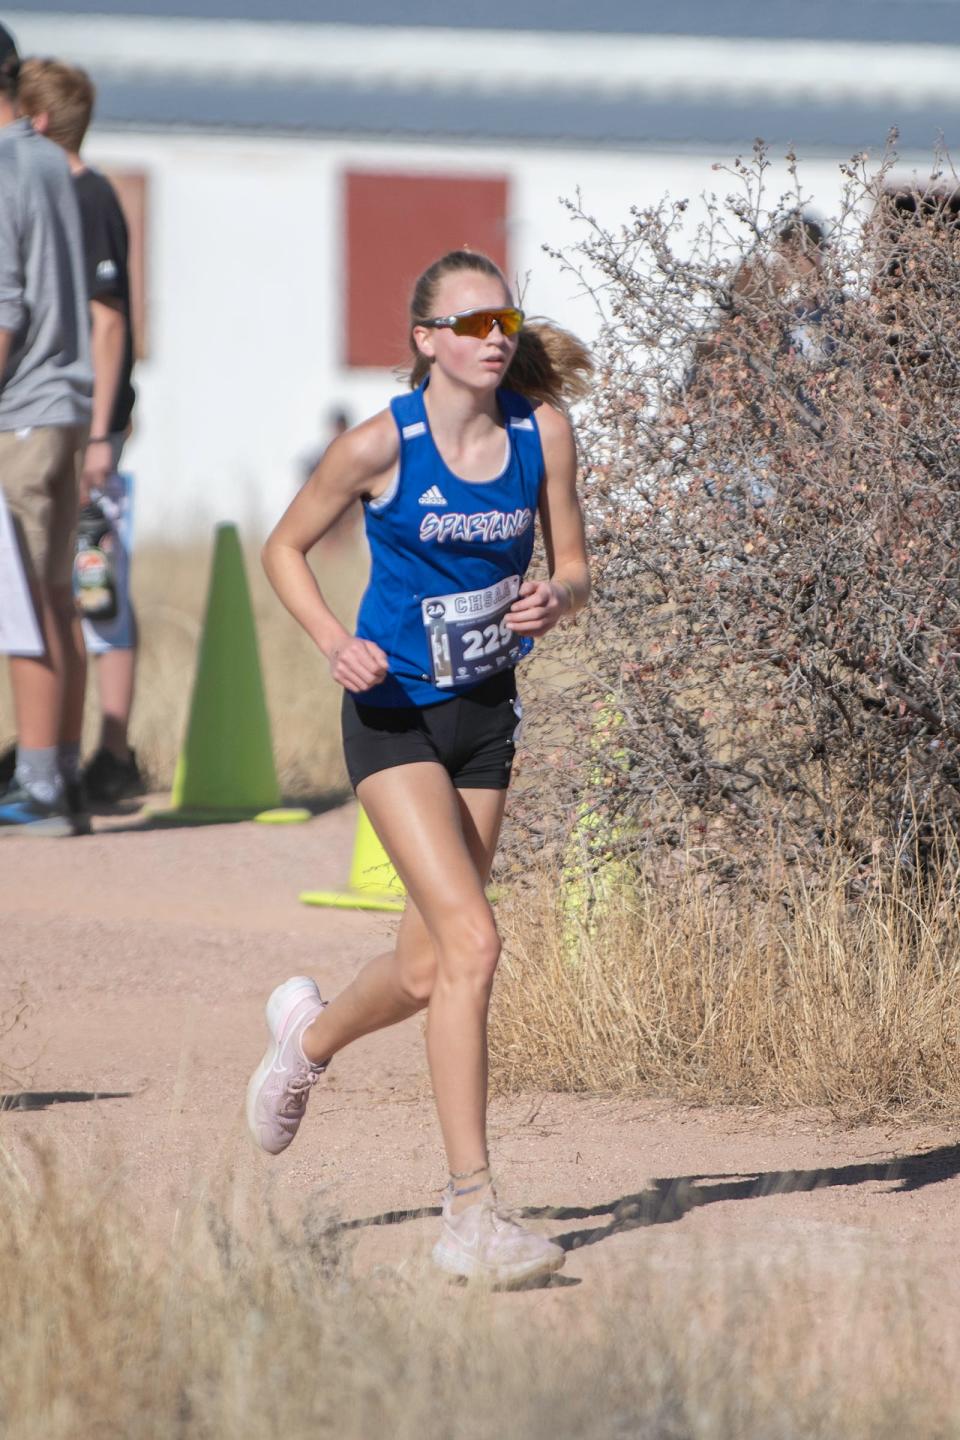 Pueblo cross country runners well represented at Cross Country State Finals